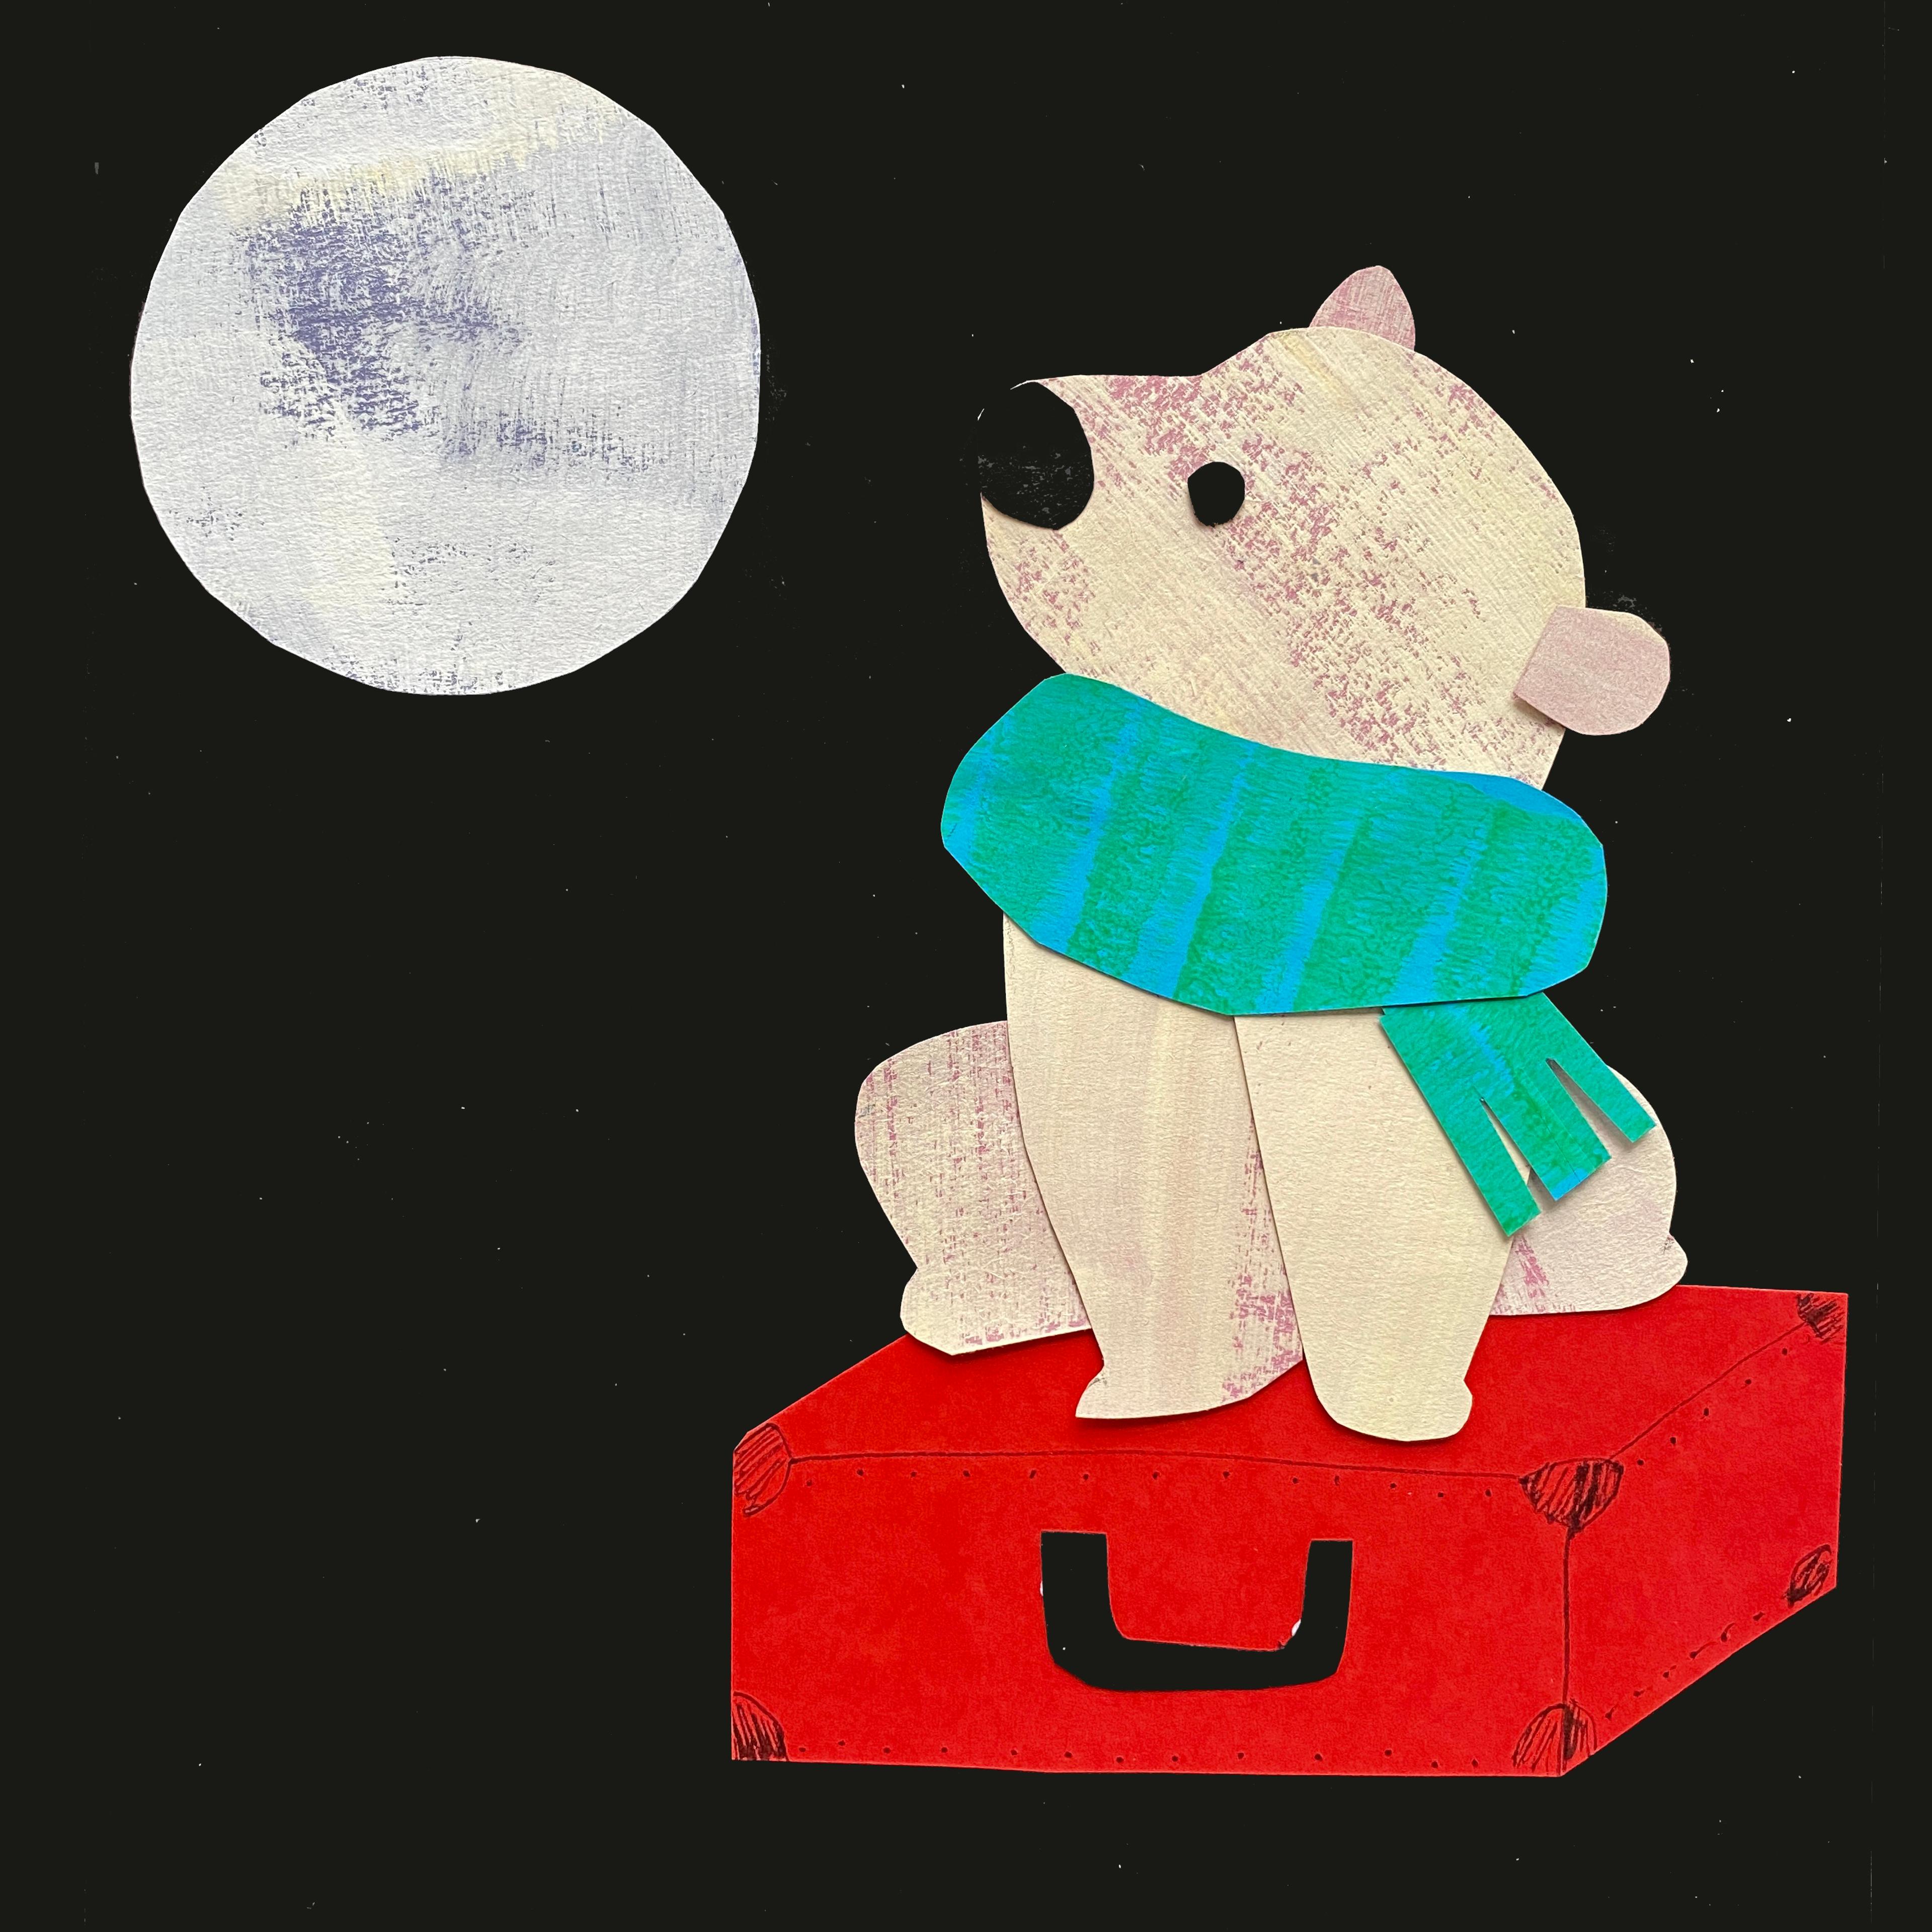 Illustration of a bear sitting on a suitcase looking up at the moon